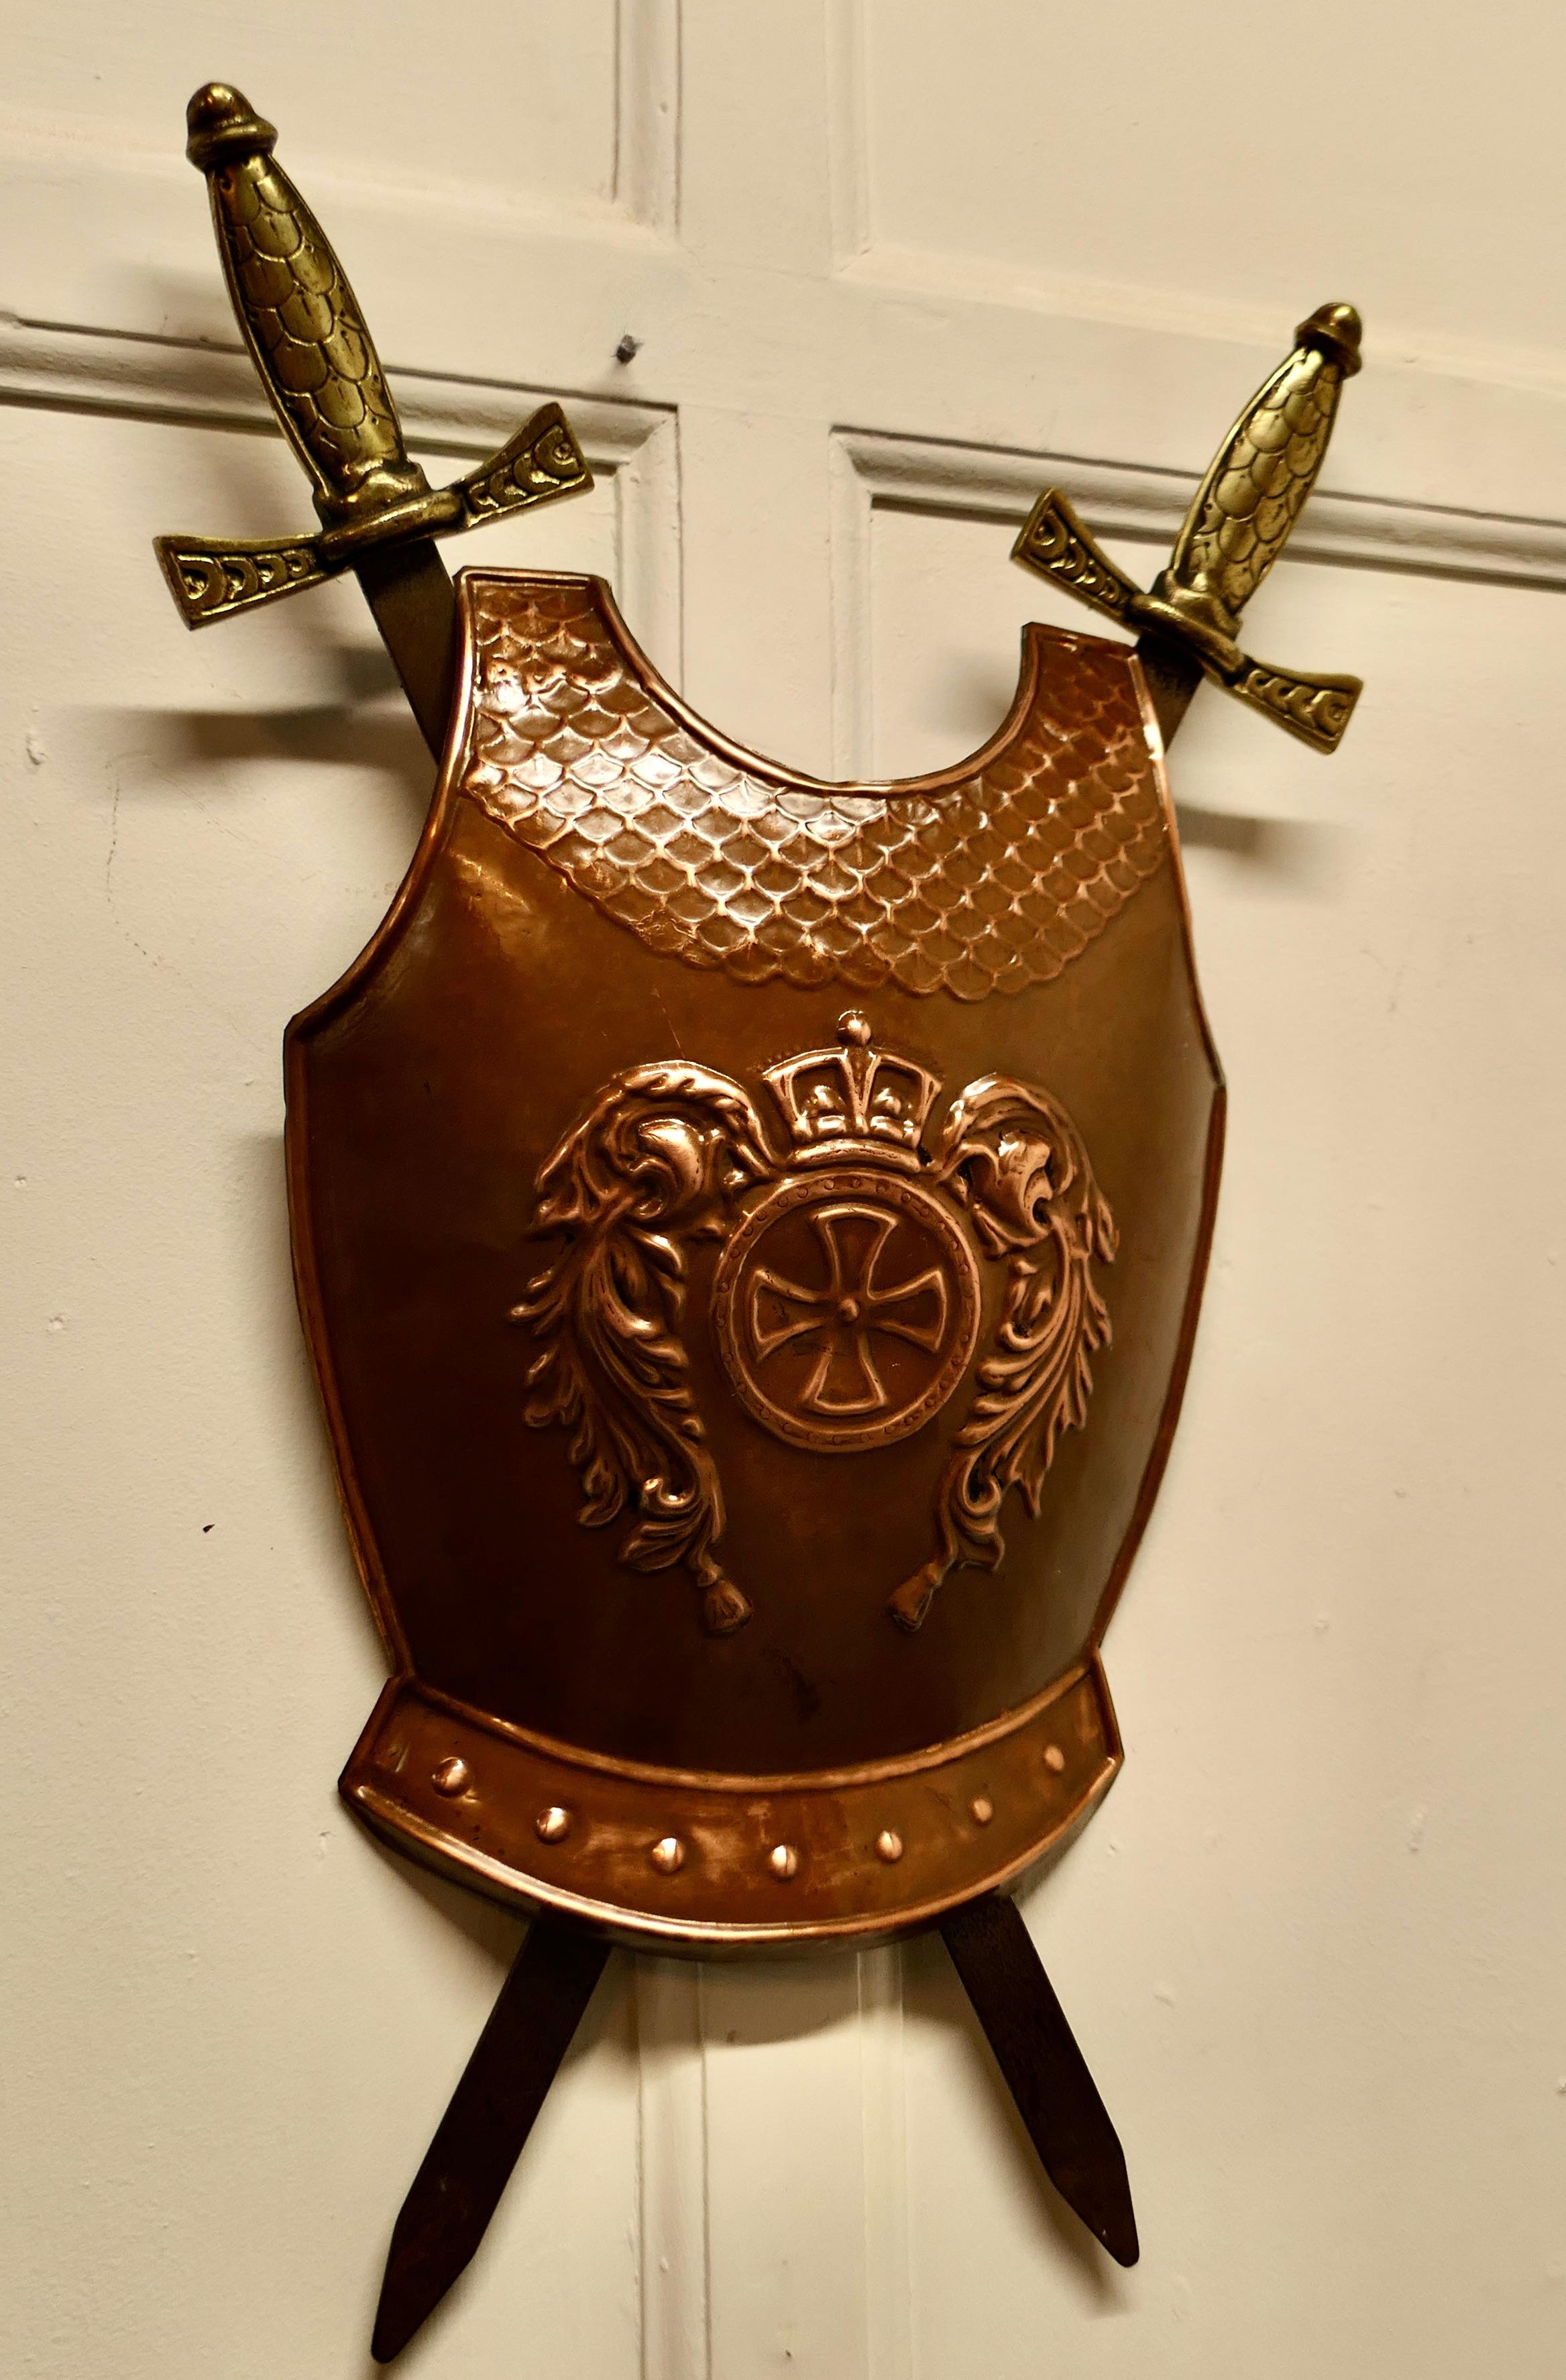 Wall Hanging Arts and Crafts Copper Breast Plate Shield with Cross Swords In Good Condition For Sale In Chillerton, Isle of Wight